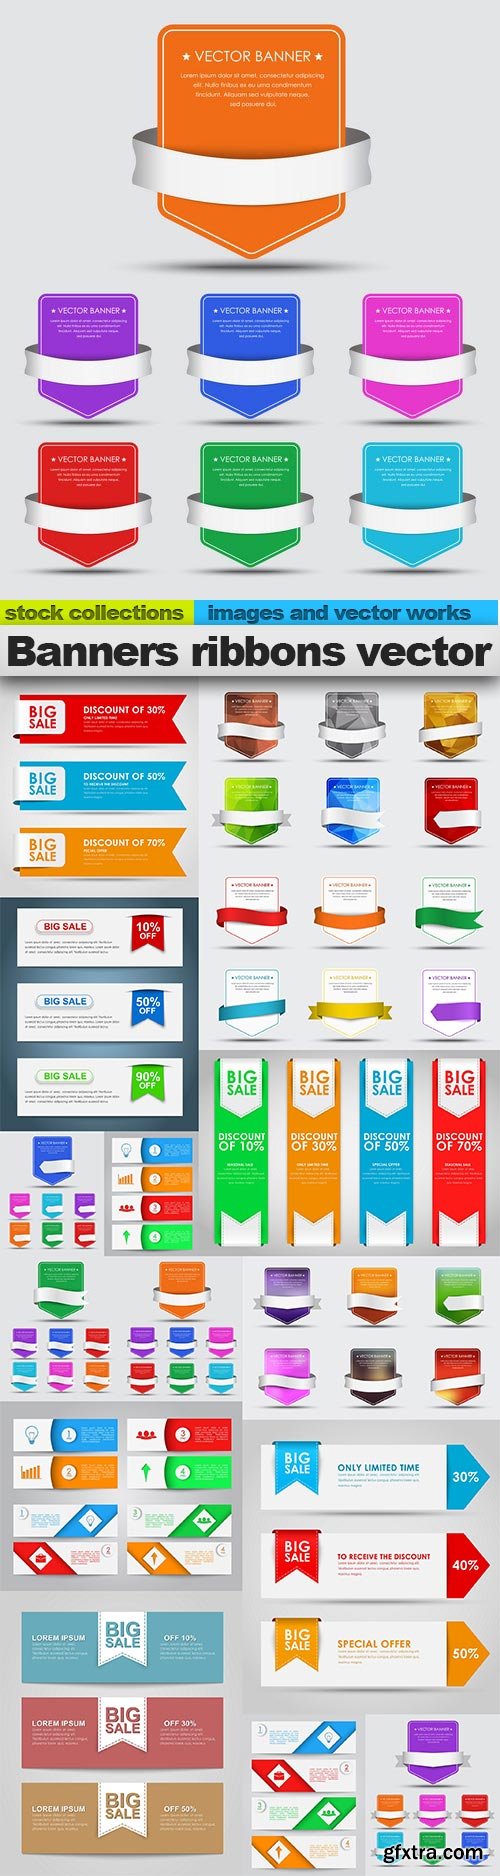 Banners ribbons vector, 15 x EPS